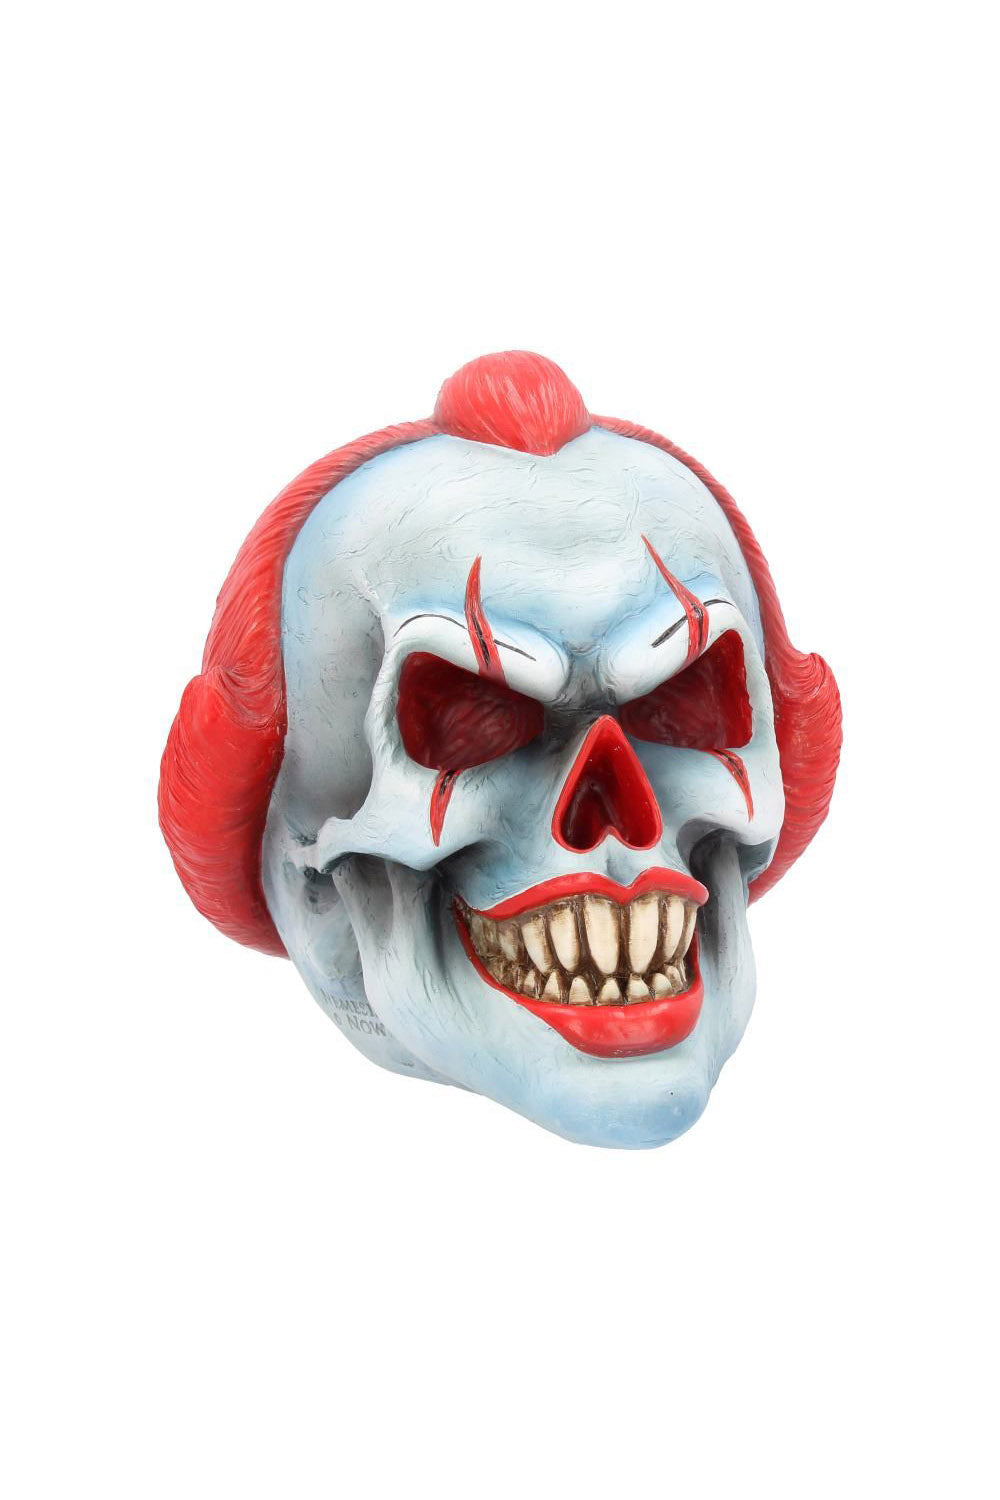 Play Time Skull Scary Horror Clown Head Statue